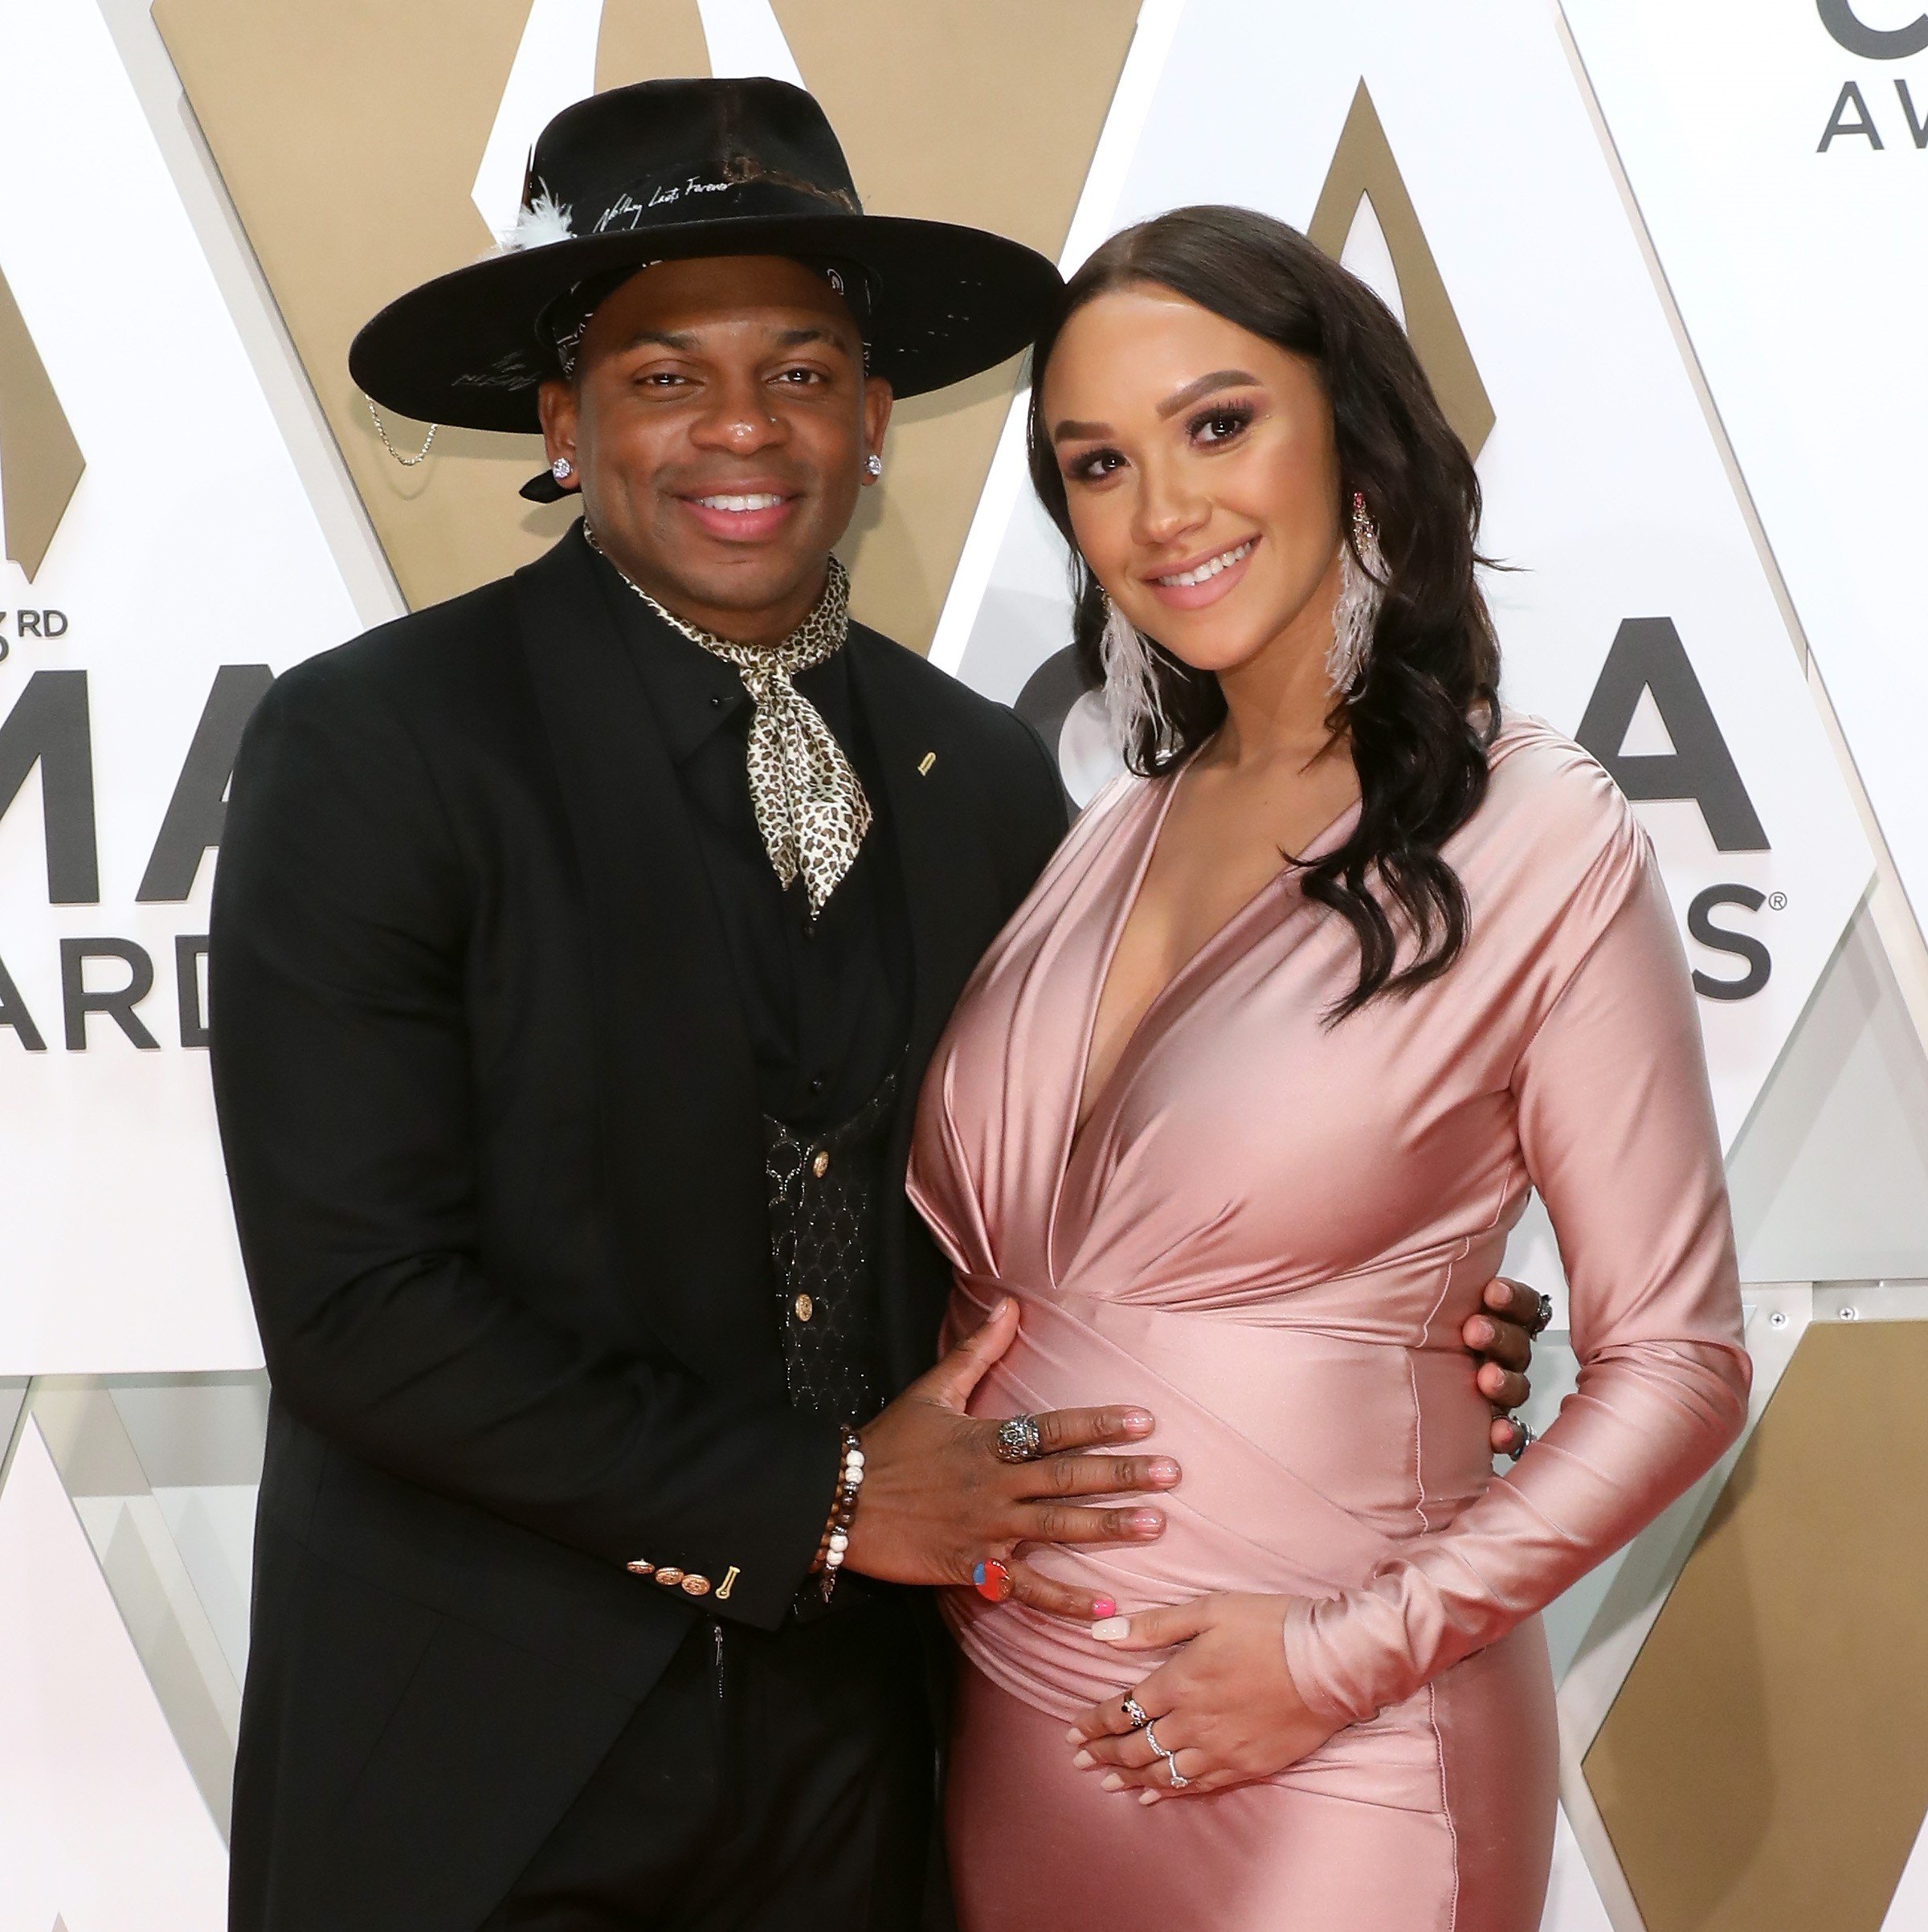 Jimmie Allen and Alexis Gale at the 53nd annual CMA Awards in 2019 in Nashville, Tennesse. | Source: Getty Imagese.